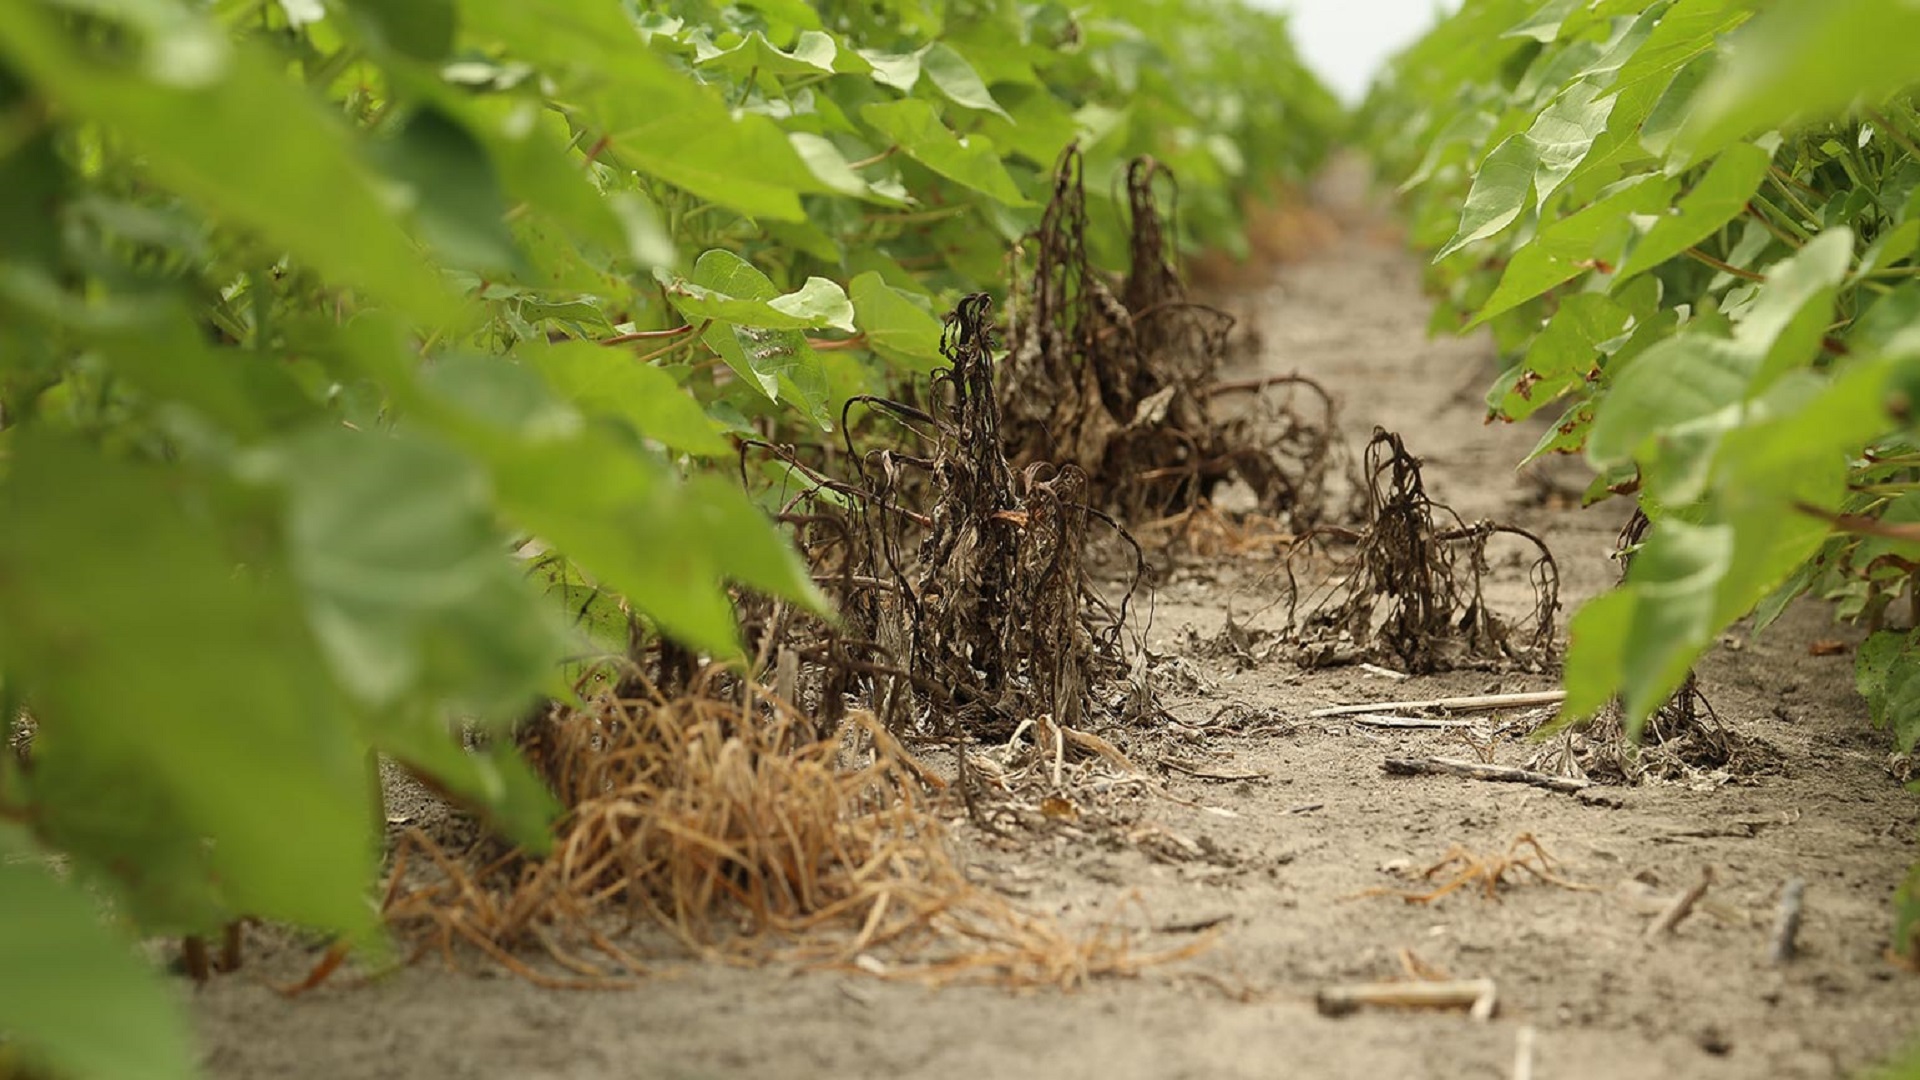 Variable deficit irrigation can improve cotton yields, save water